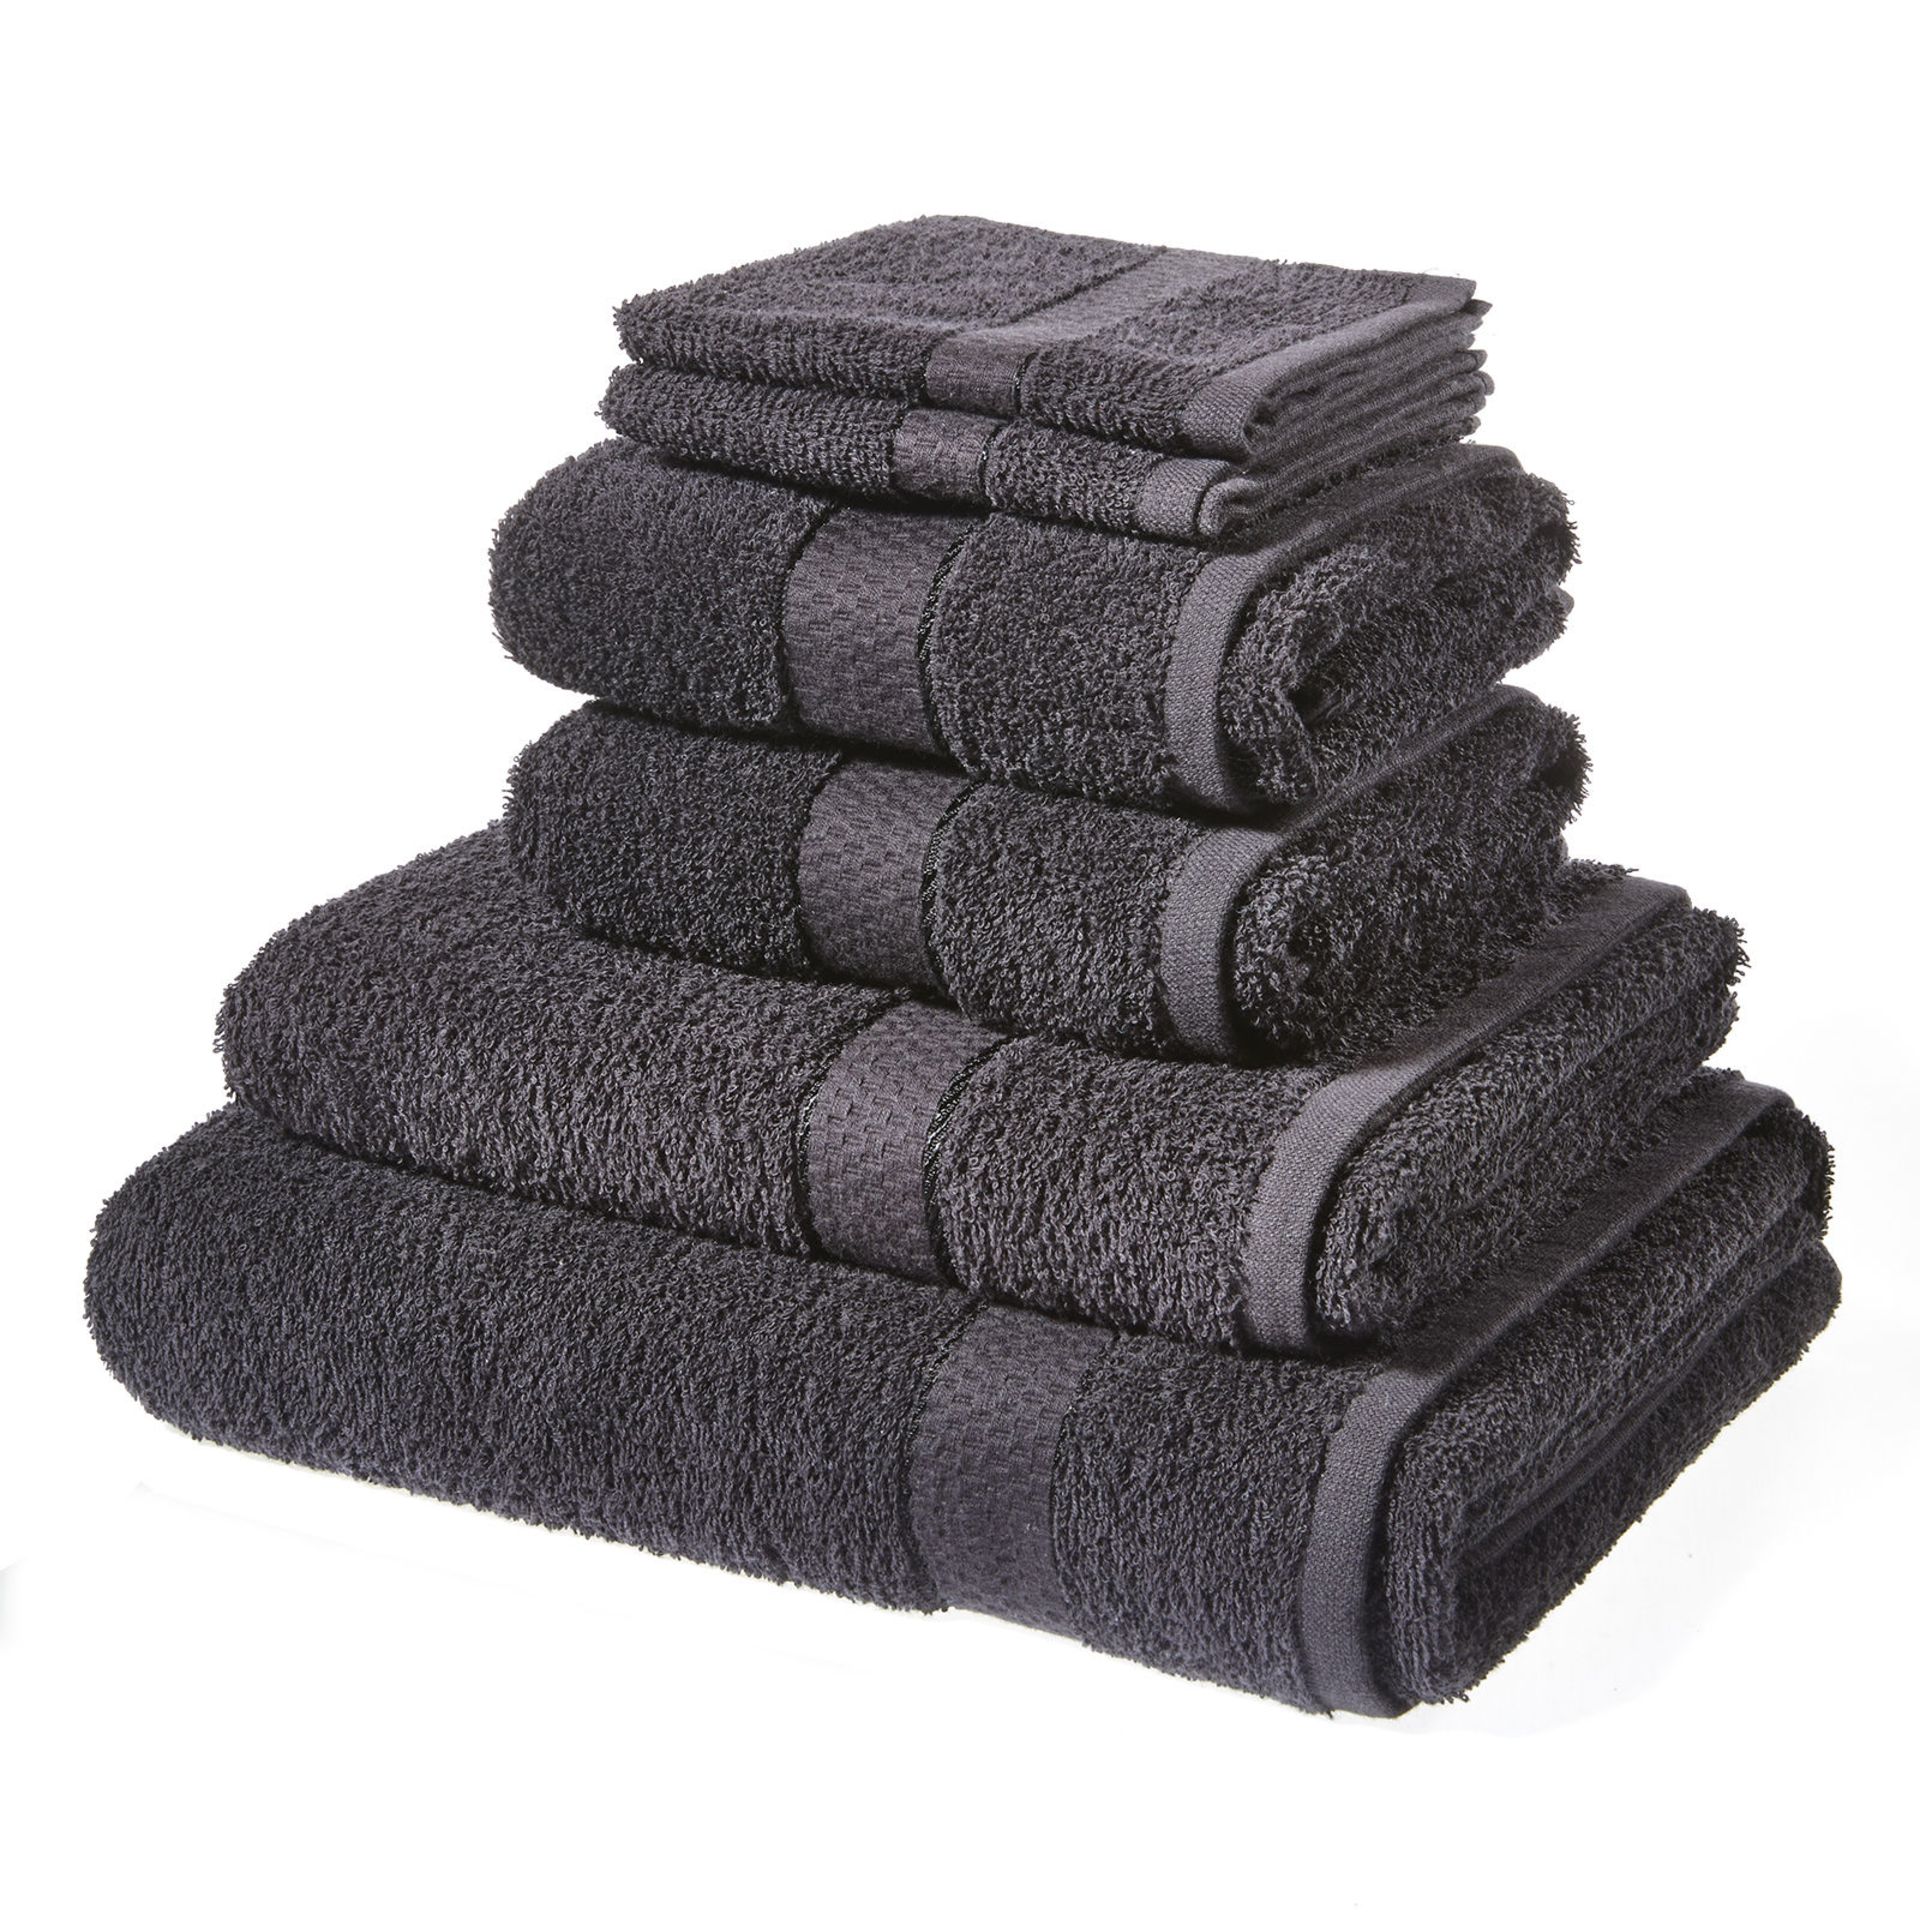 V Brand New Black 6 Piece Towel Bale Set With 2 Face Towels - 2 Hand Towels - 1 Bath Sheet - 1